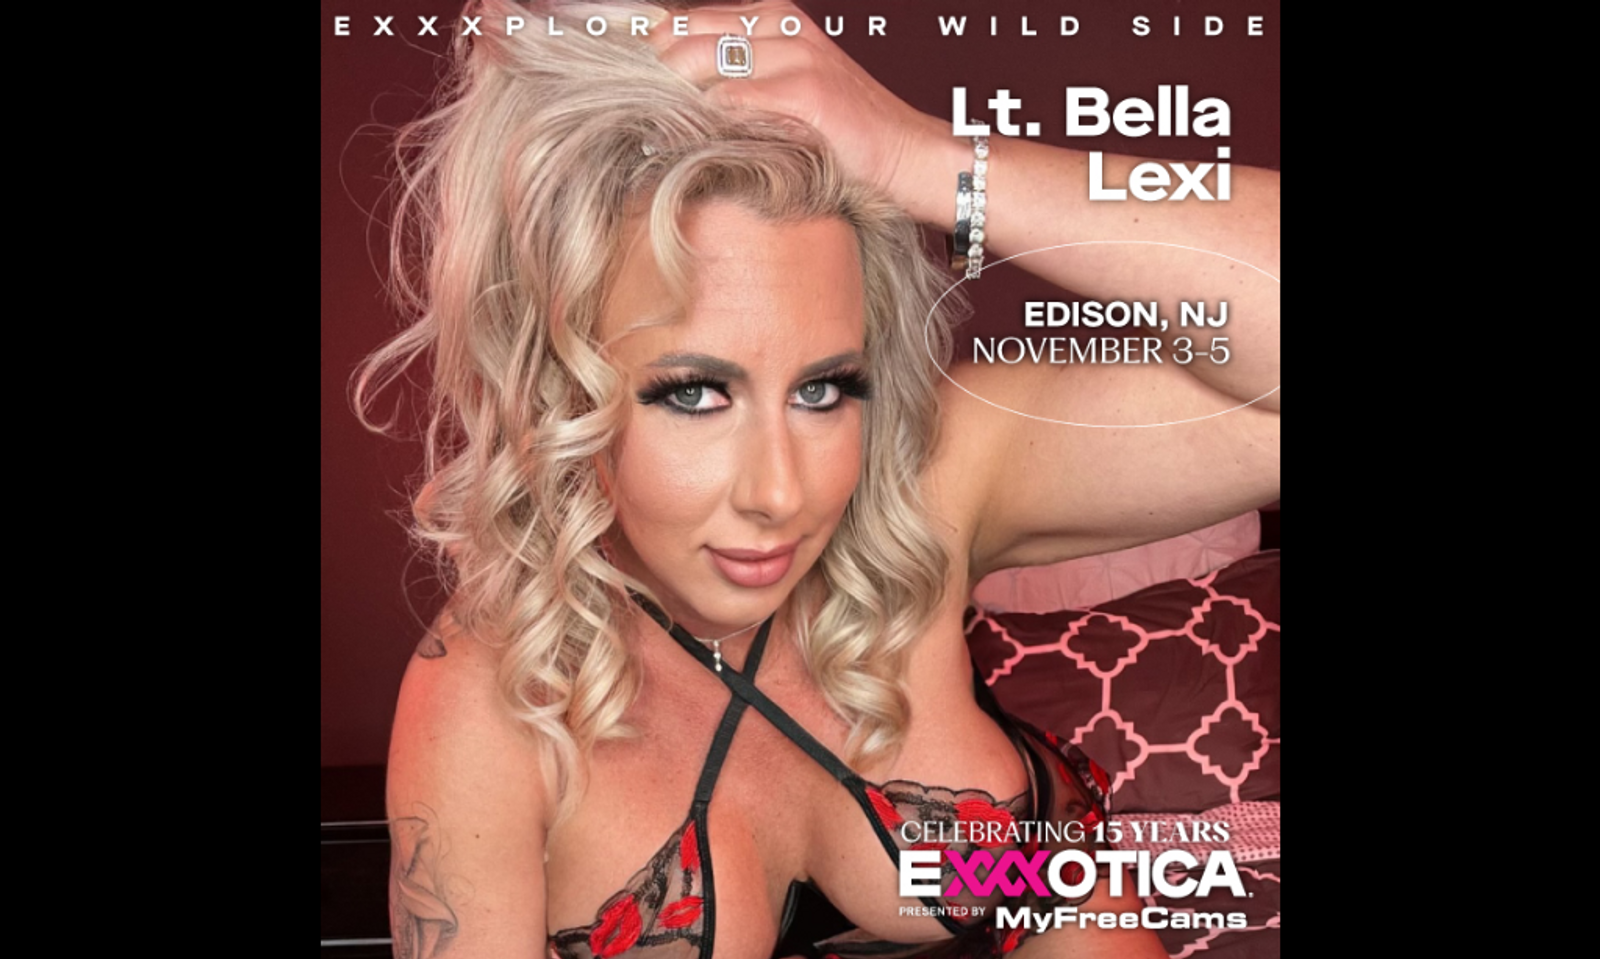 Lt. Bella Lexi to Attend Exxxotica New Jersey This Weekend